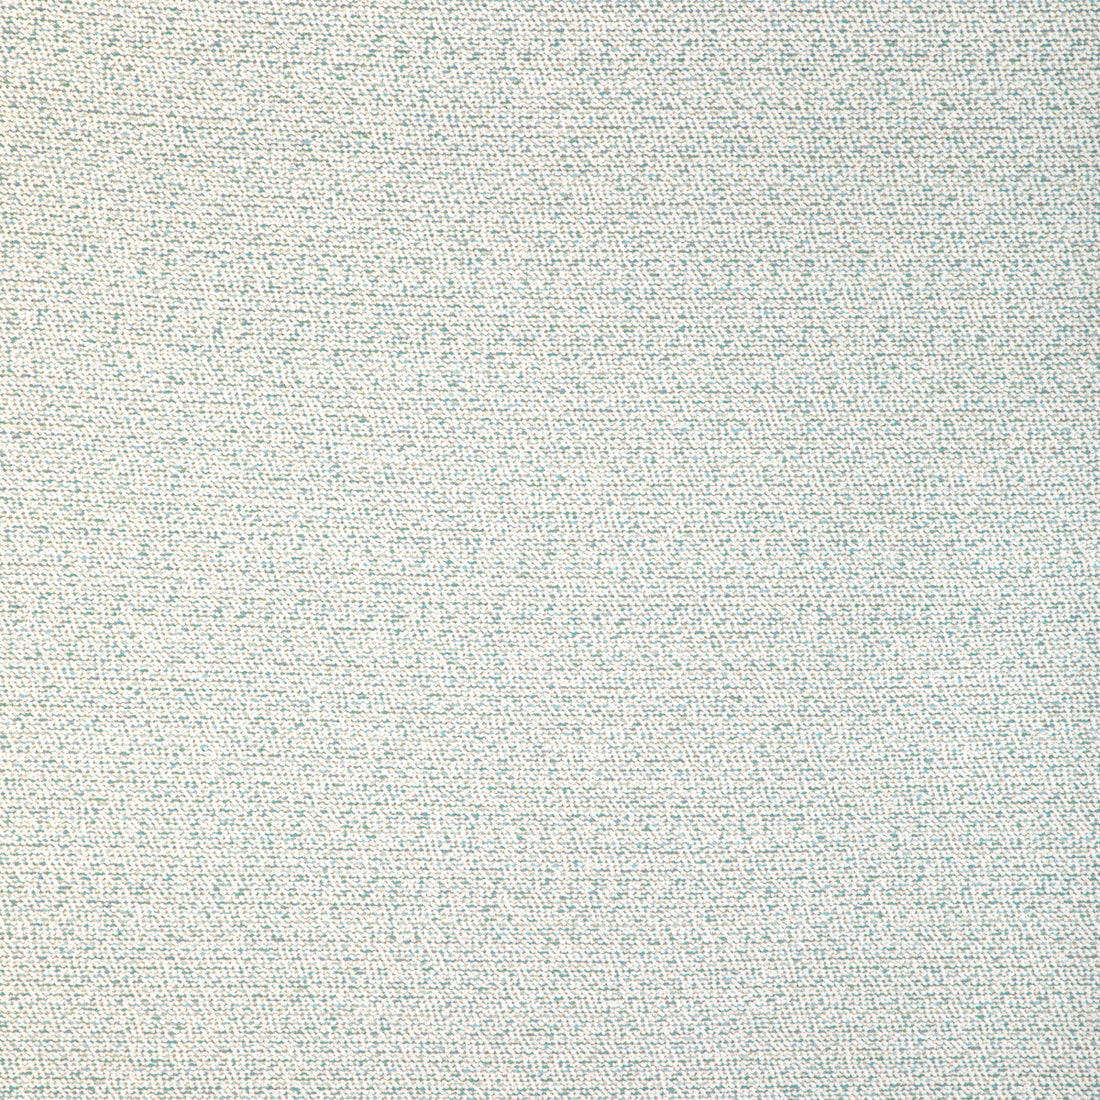 Linden fabric in ocean color - pattern 37047.13.0 - by Kravet Design in the Thom Filicia Latitude collection